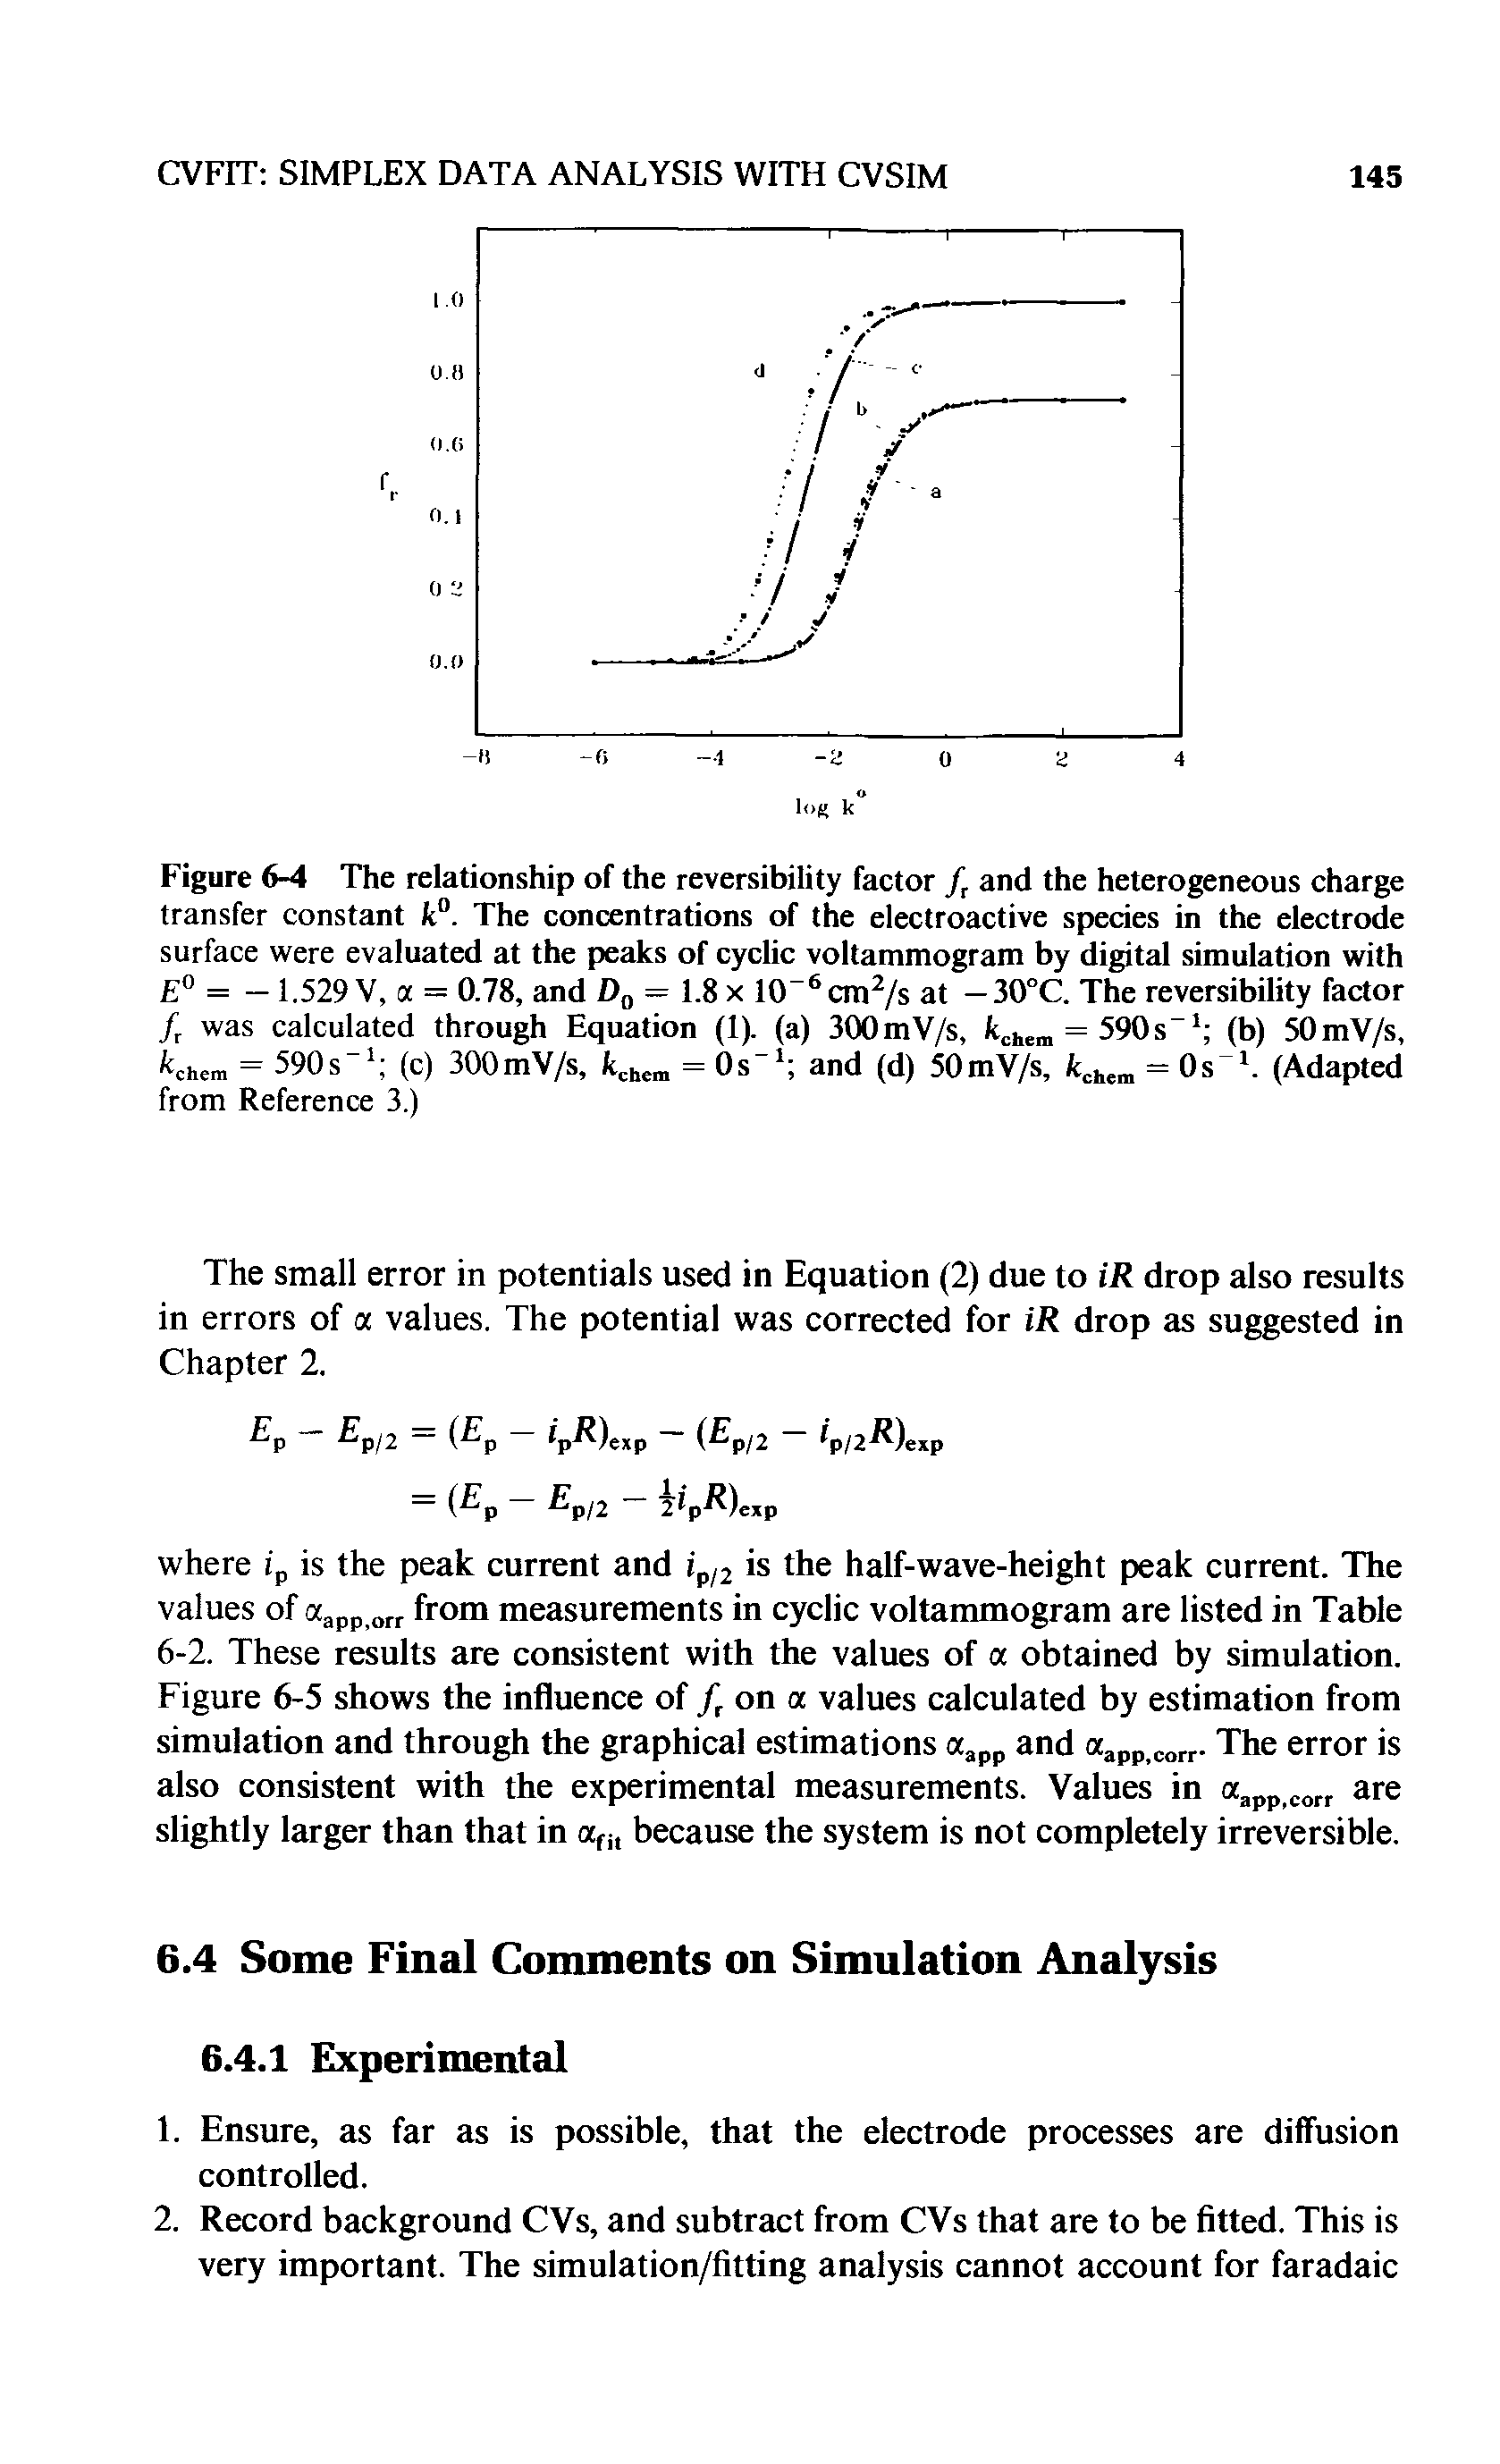 Figure 6-4 The relationship of the reversibility factor f, and the heterogeneous charge transfer constant k°. The concentrations of the electroactive species in the electrode surface were evaluated at the peaks of cyclic voltammogram by digital simulation with E° = — 1.529 V, a = 0.78, and D = 1.8 x 10 cmVs at — 30°C. The reversibility factor /, was calculated through Equation (1). (a) 300mV/s, = 590s (b) 50mV/s,...